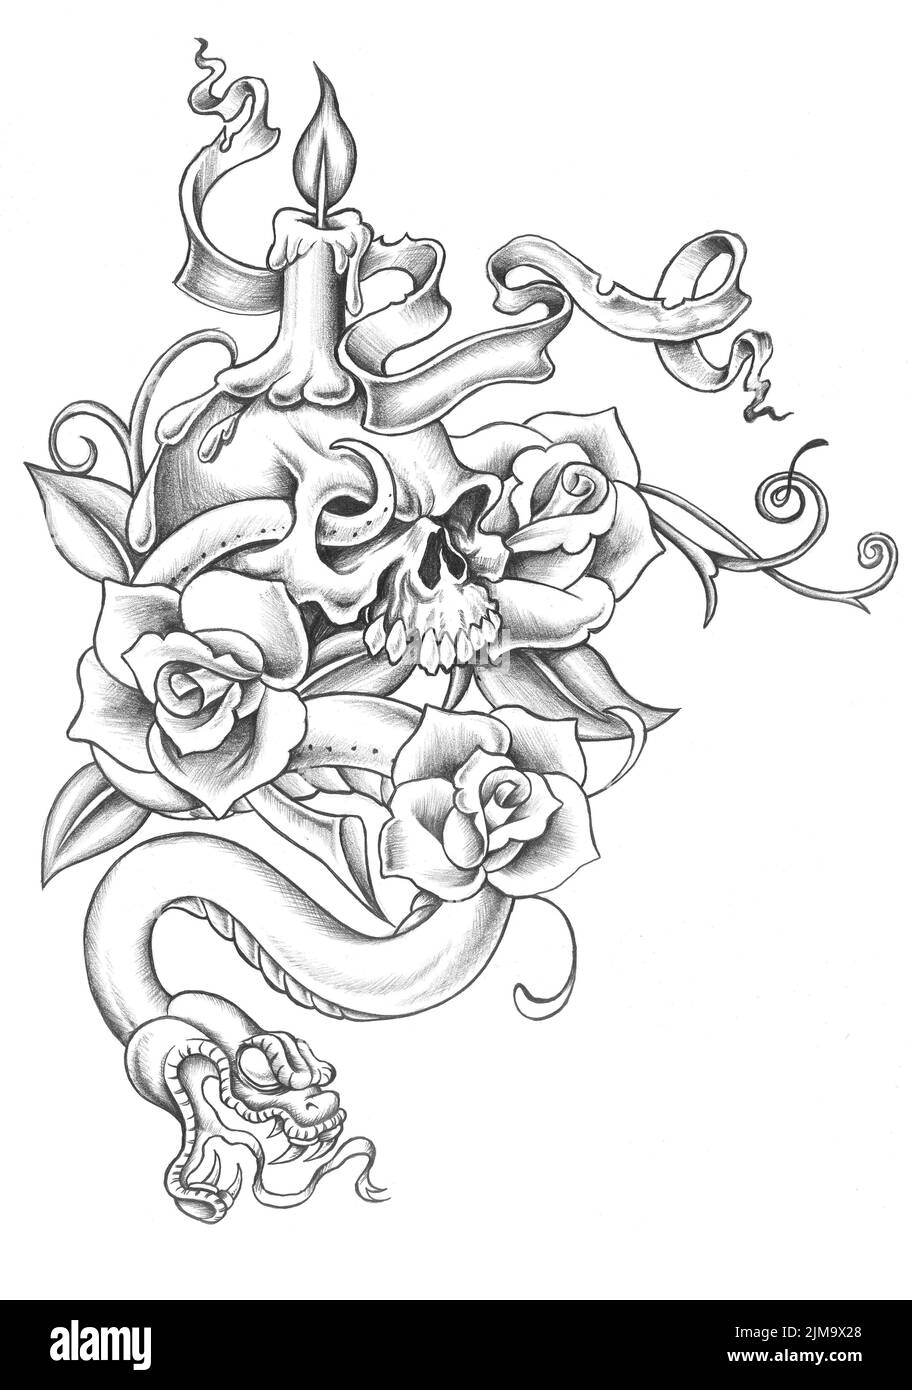 A tattoo design of a scary human skull wrapped with a snake, flowers ...